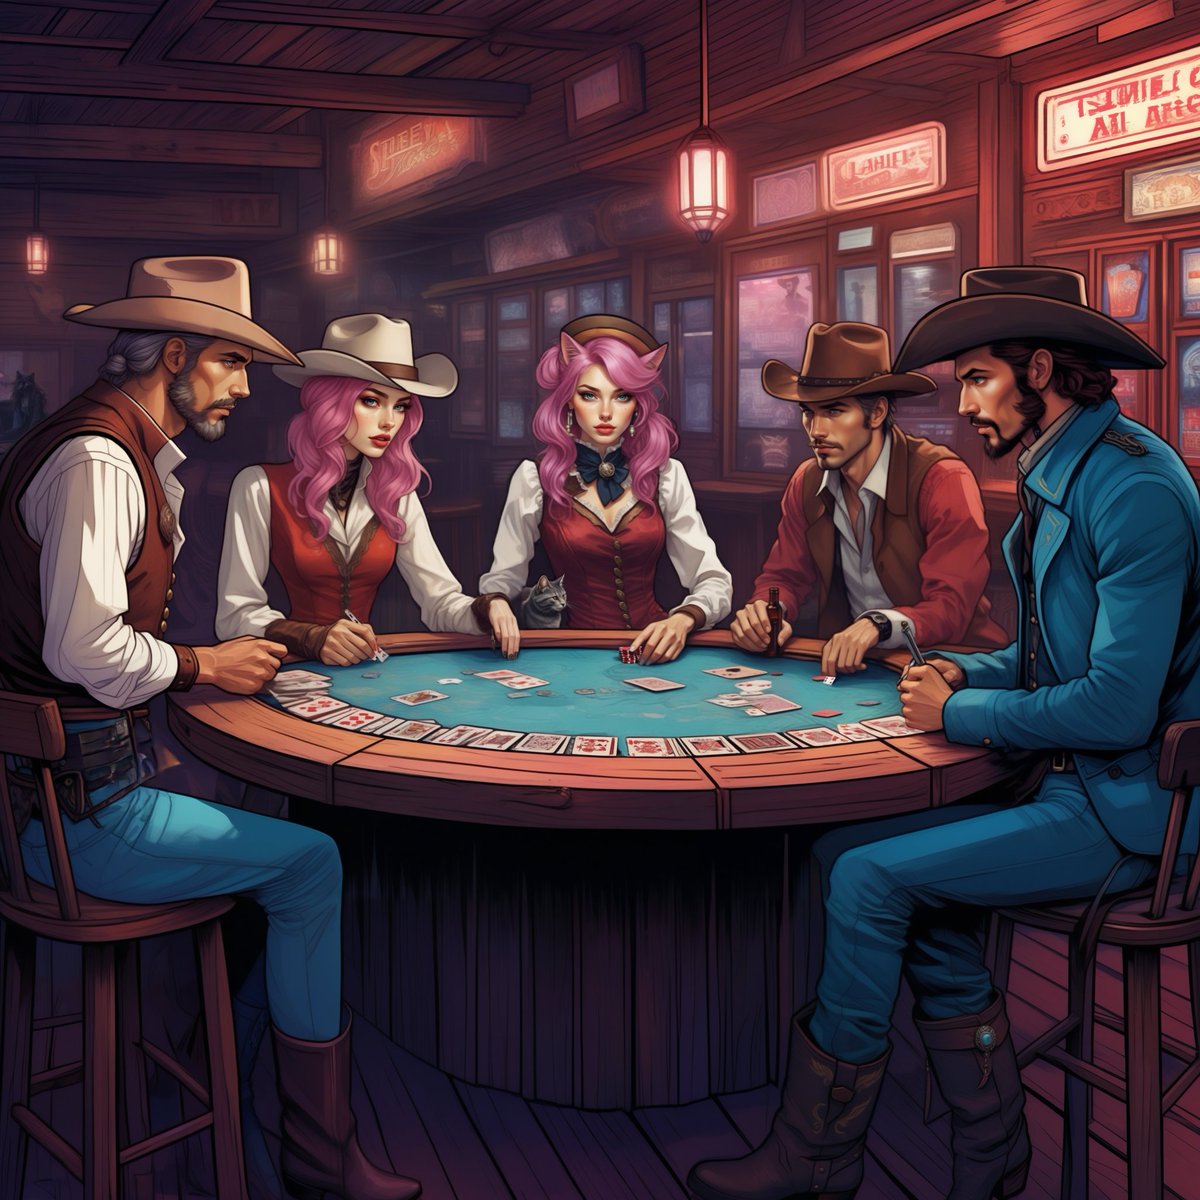 The dusty western saloon, with its wood-paneled walls and lantern lighting, was known for its legendary poker games. The pink haired sisters always joined the table together.

#AIart #AIArtwork #aigirl #aiart #AIイラスト #AI美女 #ComfyUI